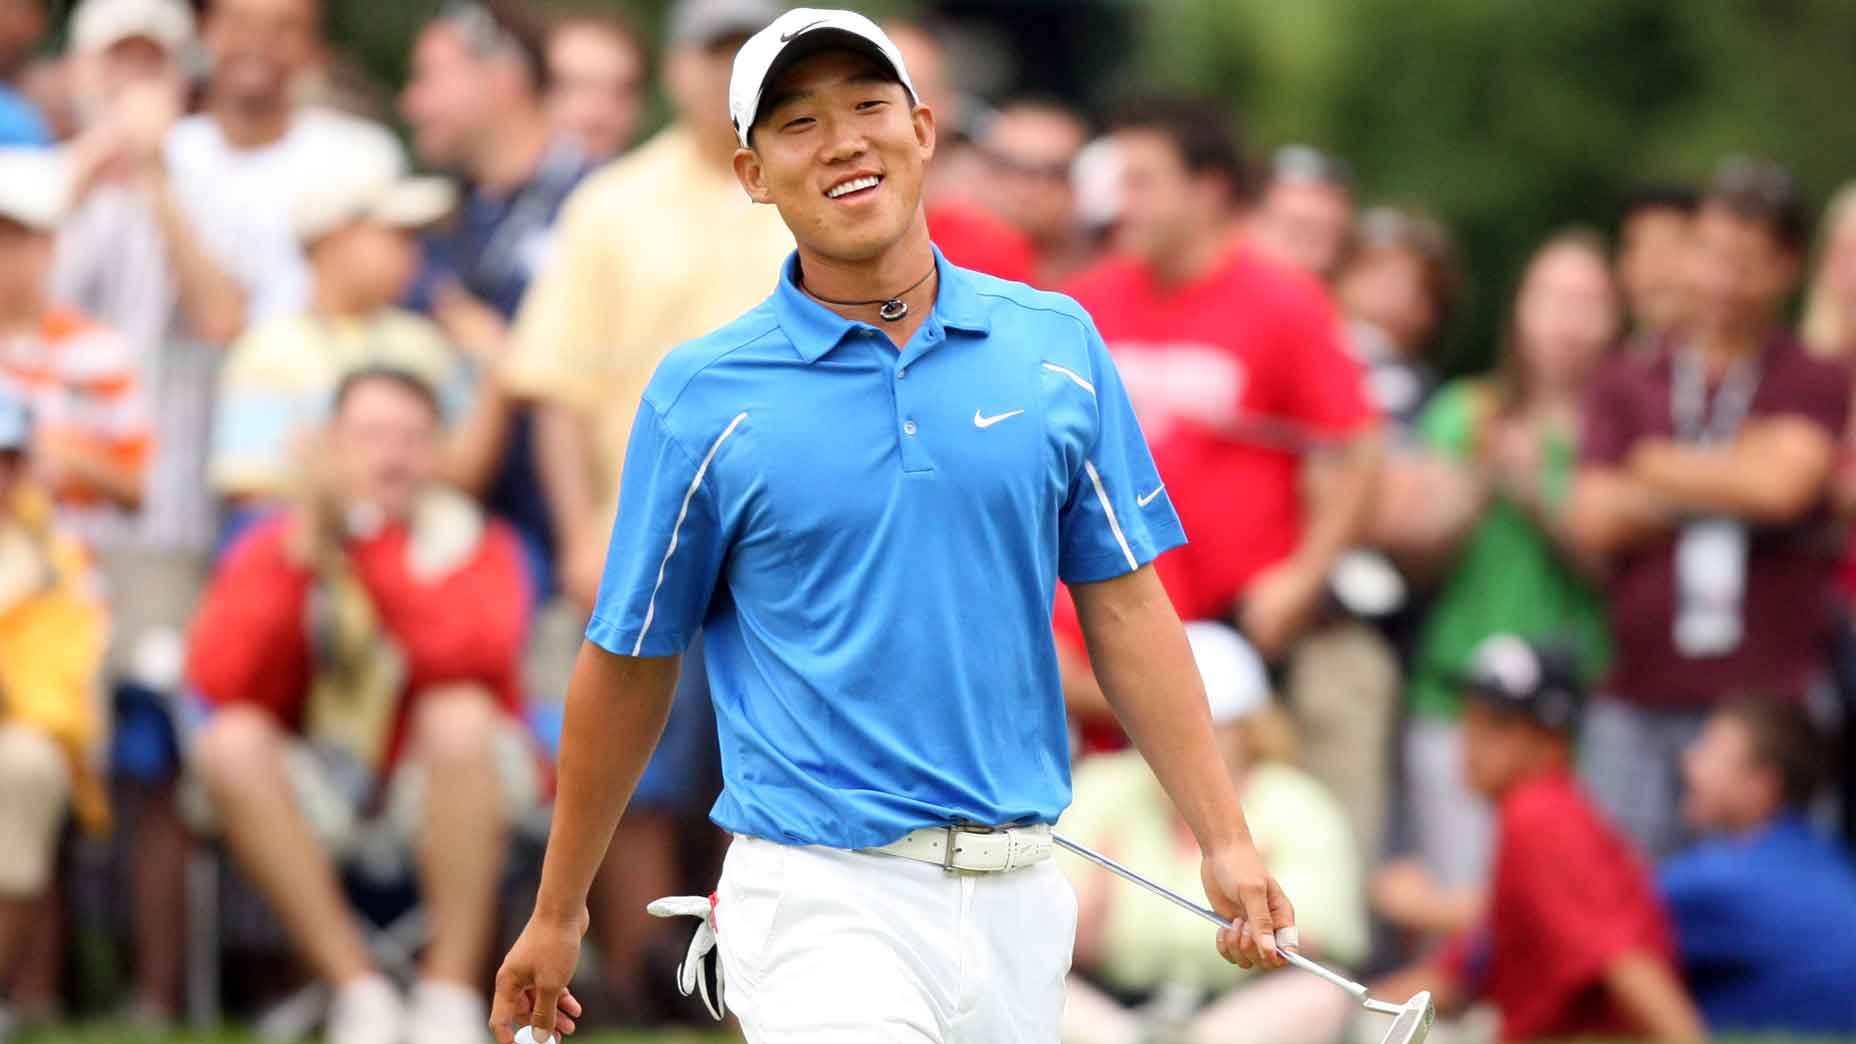 Anthony Kim smiles during the final round of the AT&T National hosted by Tiger Woods at Congressional Country Club on July 5, 2009 in Bethesda, Maryland.